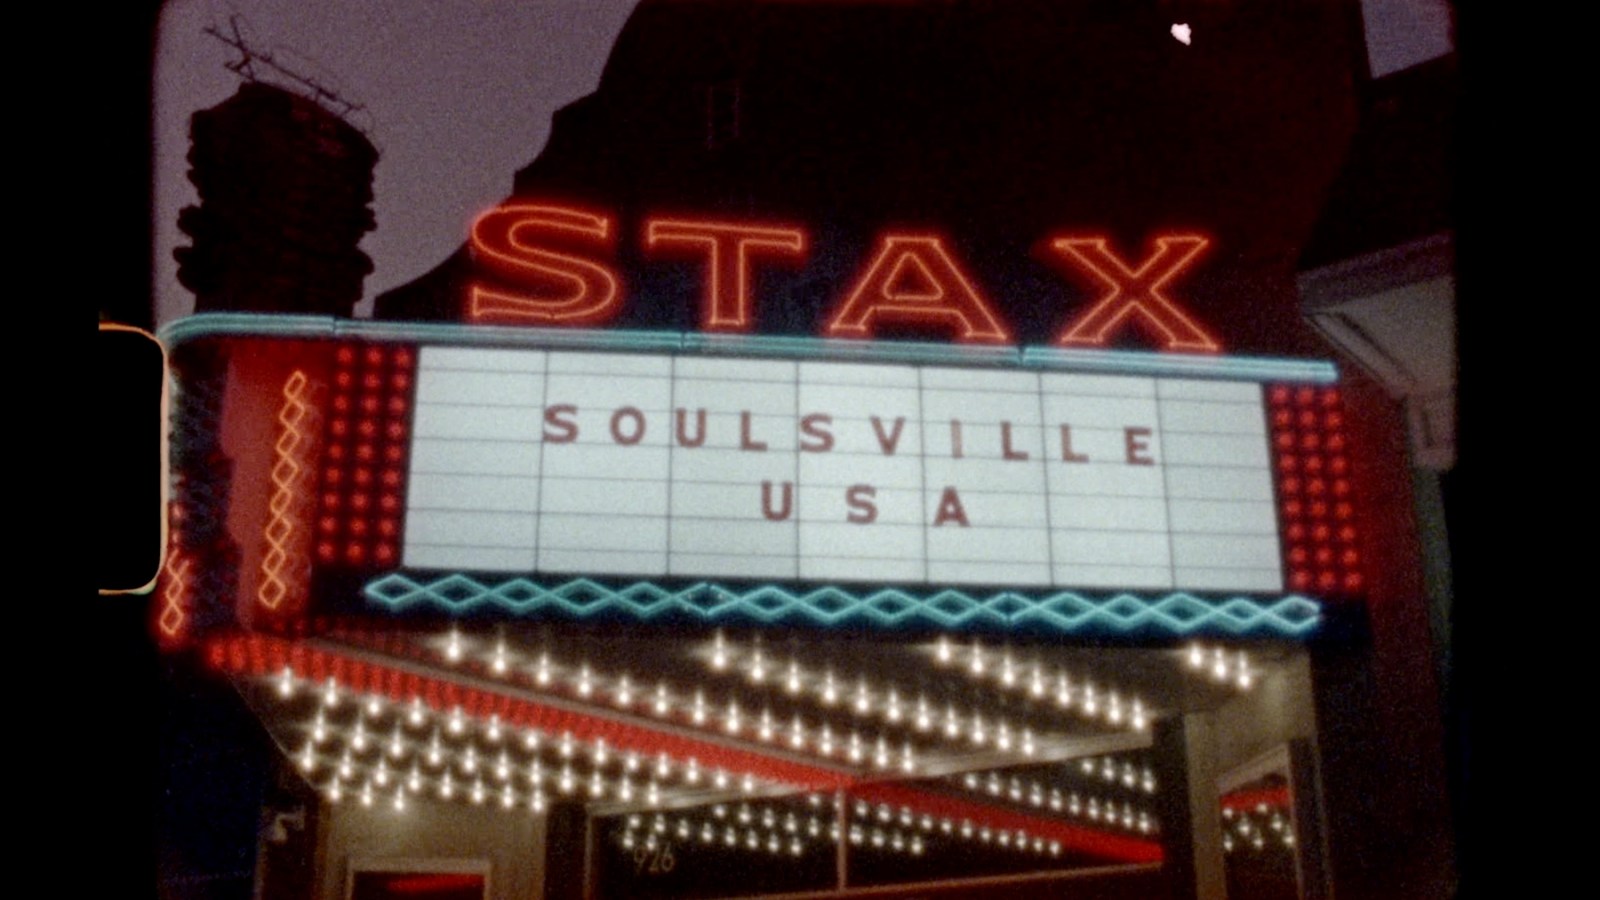 ‘Stax: Soulsville U.S.A.’ Trailer Shows How Label Thrived at Starting of Civil Rights Accelerate